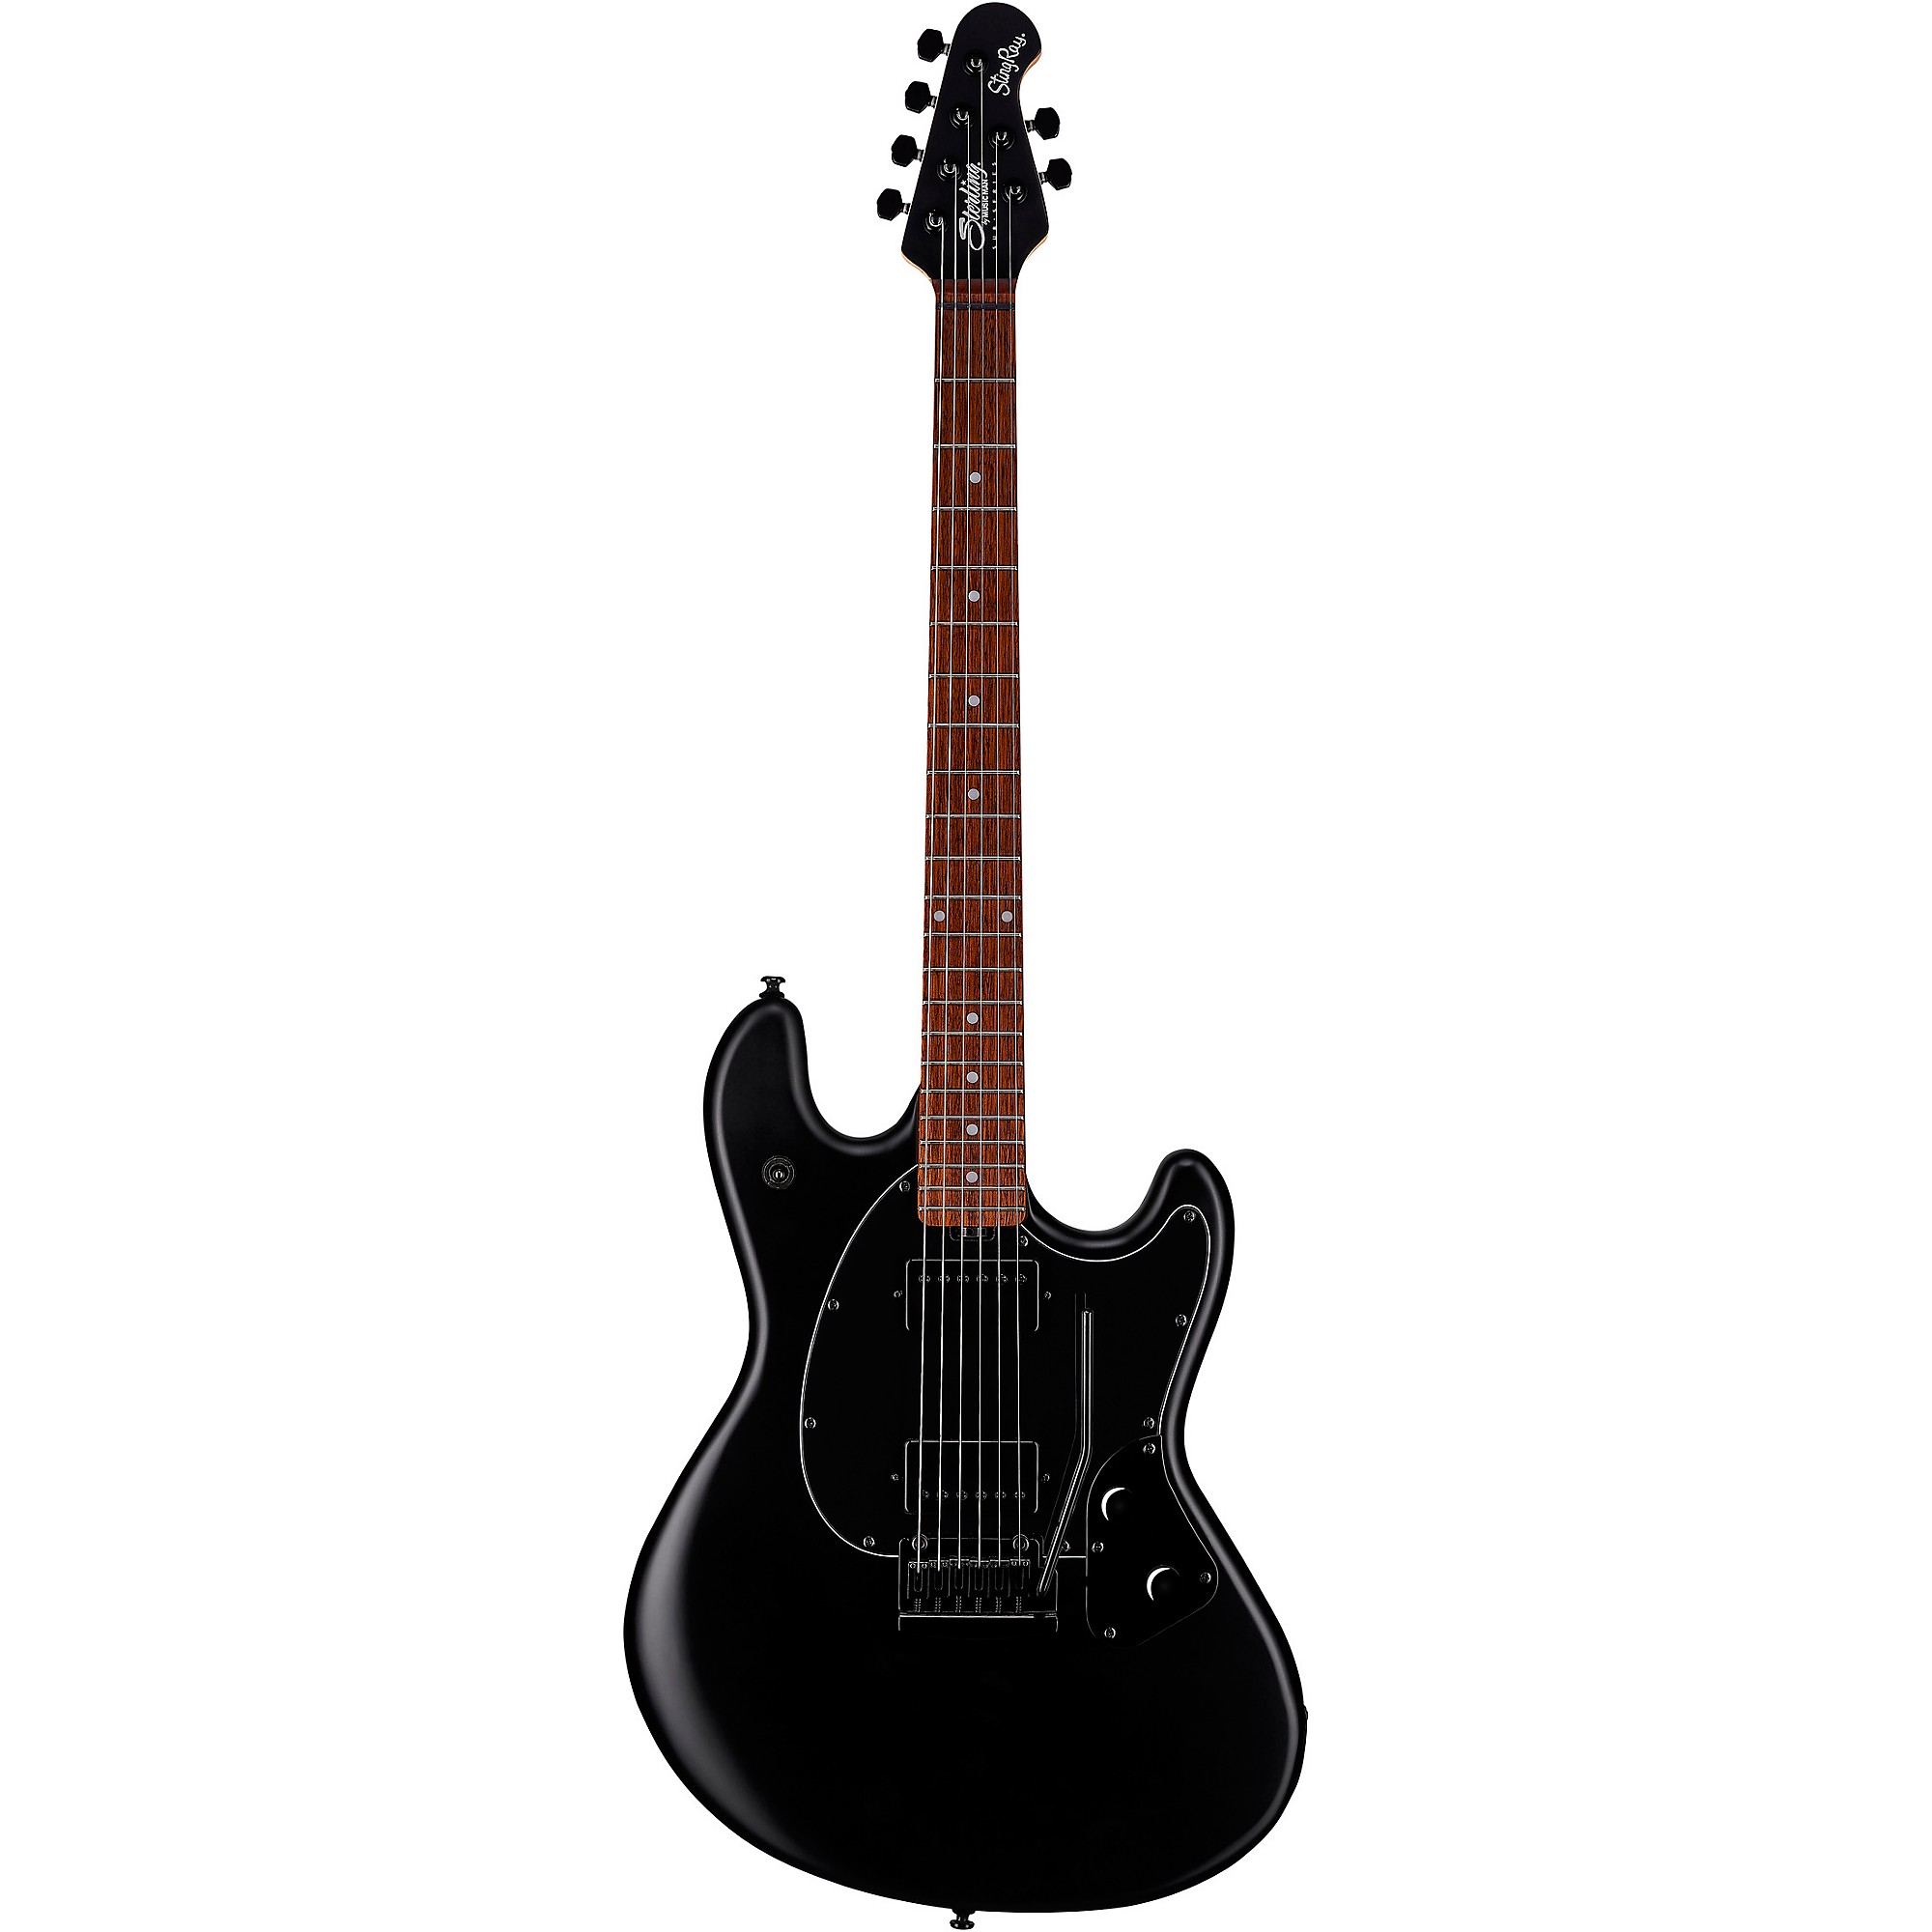 Sterling by Music Man StingRay Electric Guitar Stealth Black